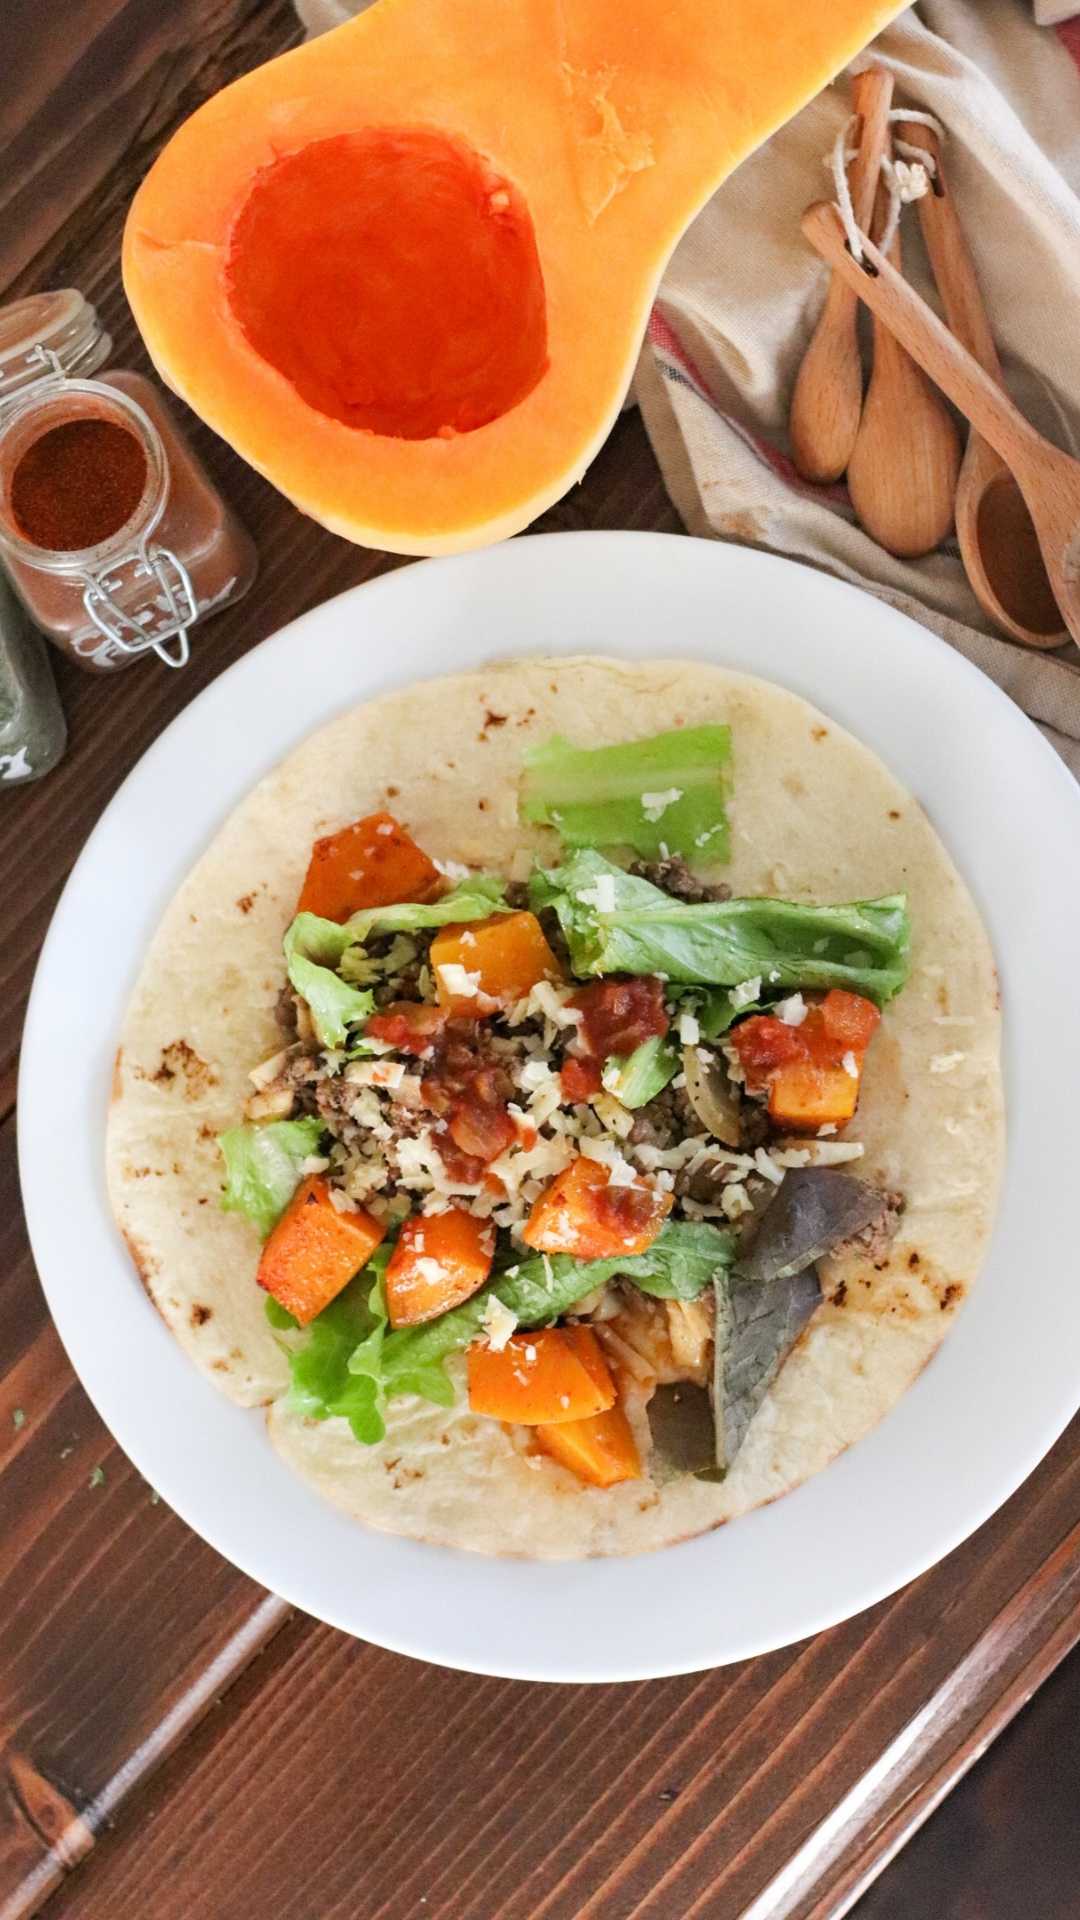 2-how-to-make-butternut-squash-and-beef-tacos-homemade-taco-seasoning-spiced-tacos-with-butternut-squash-and-ground-beef-best-taco-recipe